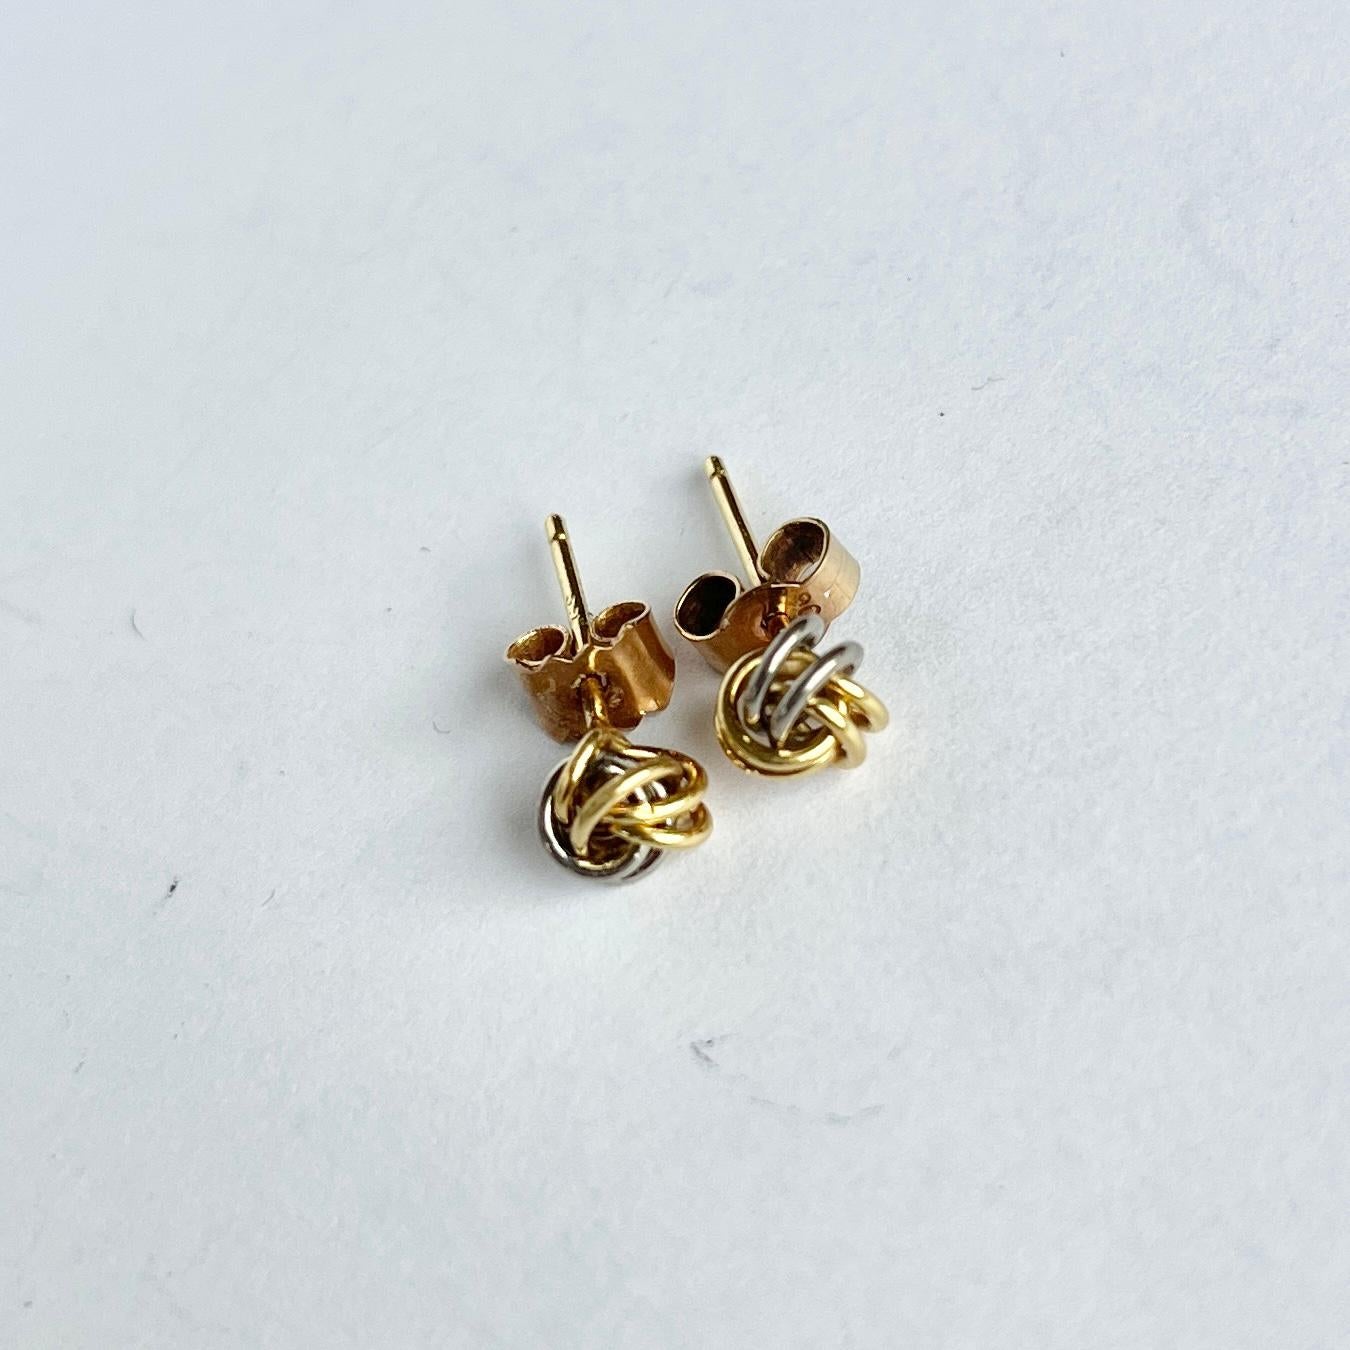 Vintage 9 Carat White and Yellow Gold Knot Stud Earring In Good Condition For Sale In Chipping Campden, GB